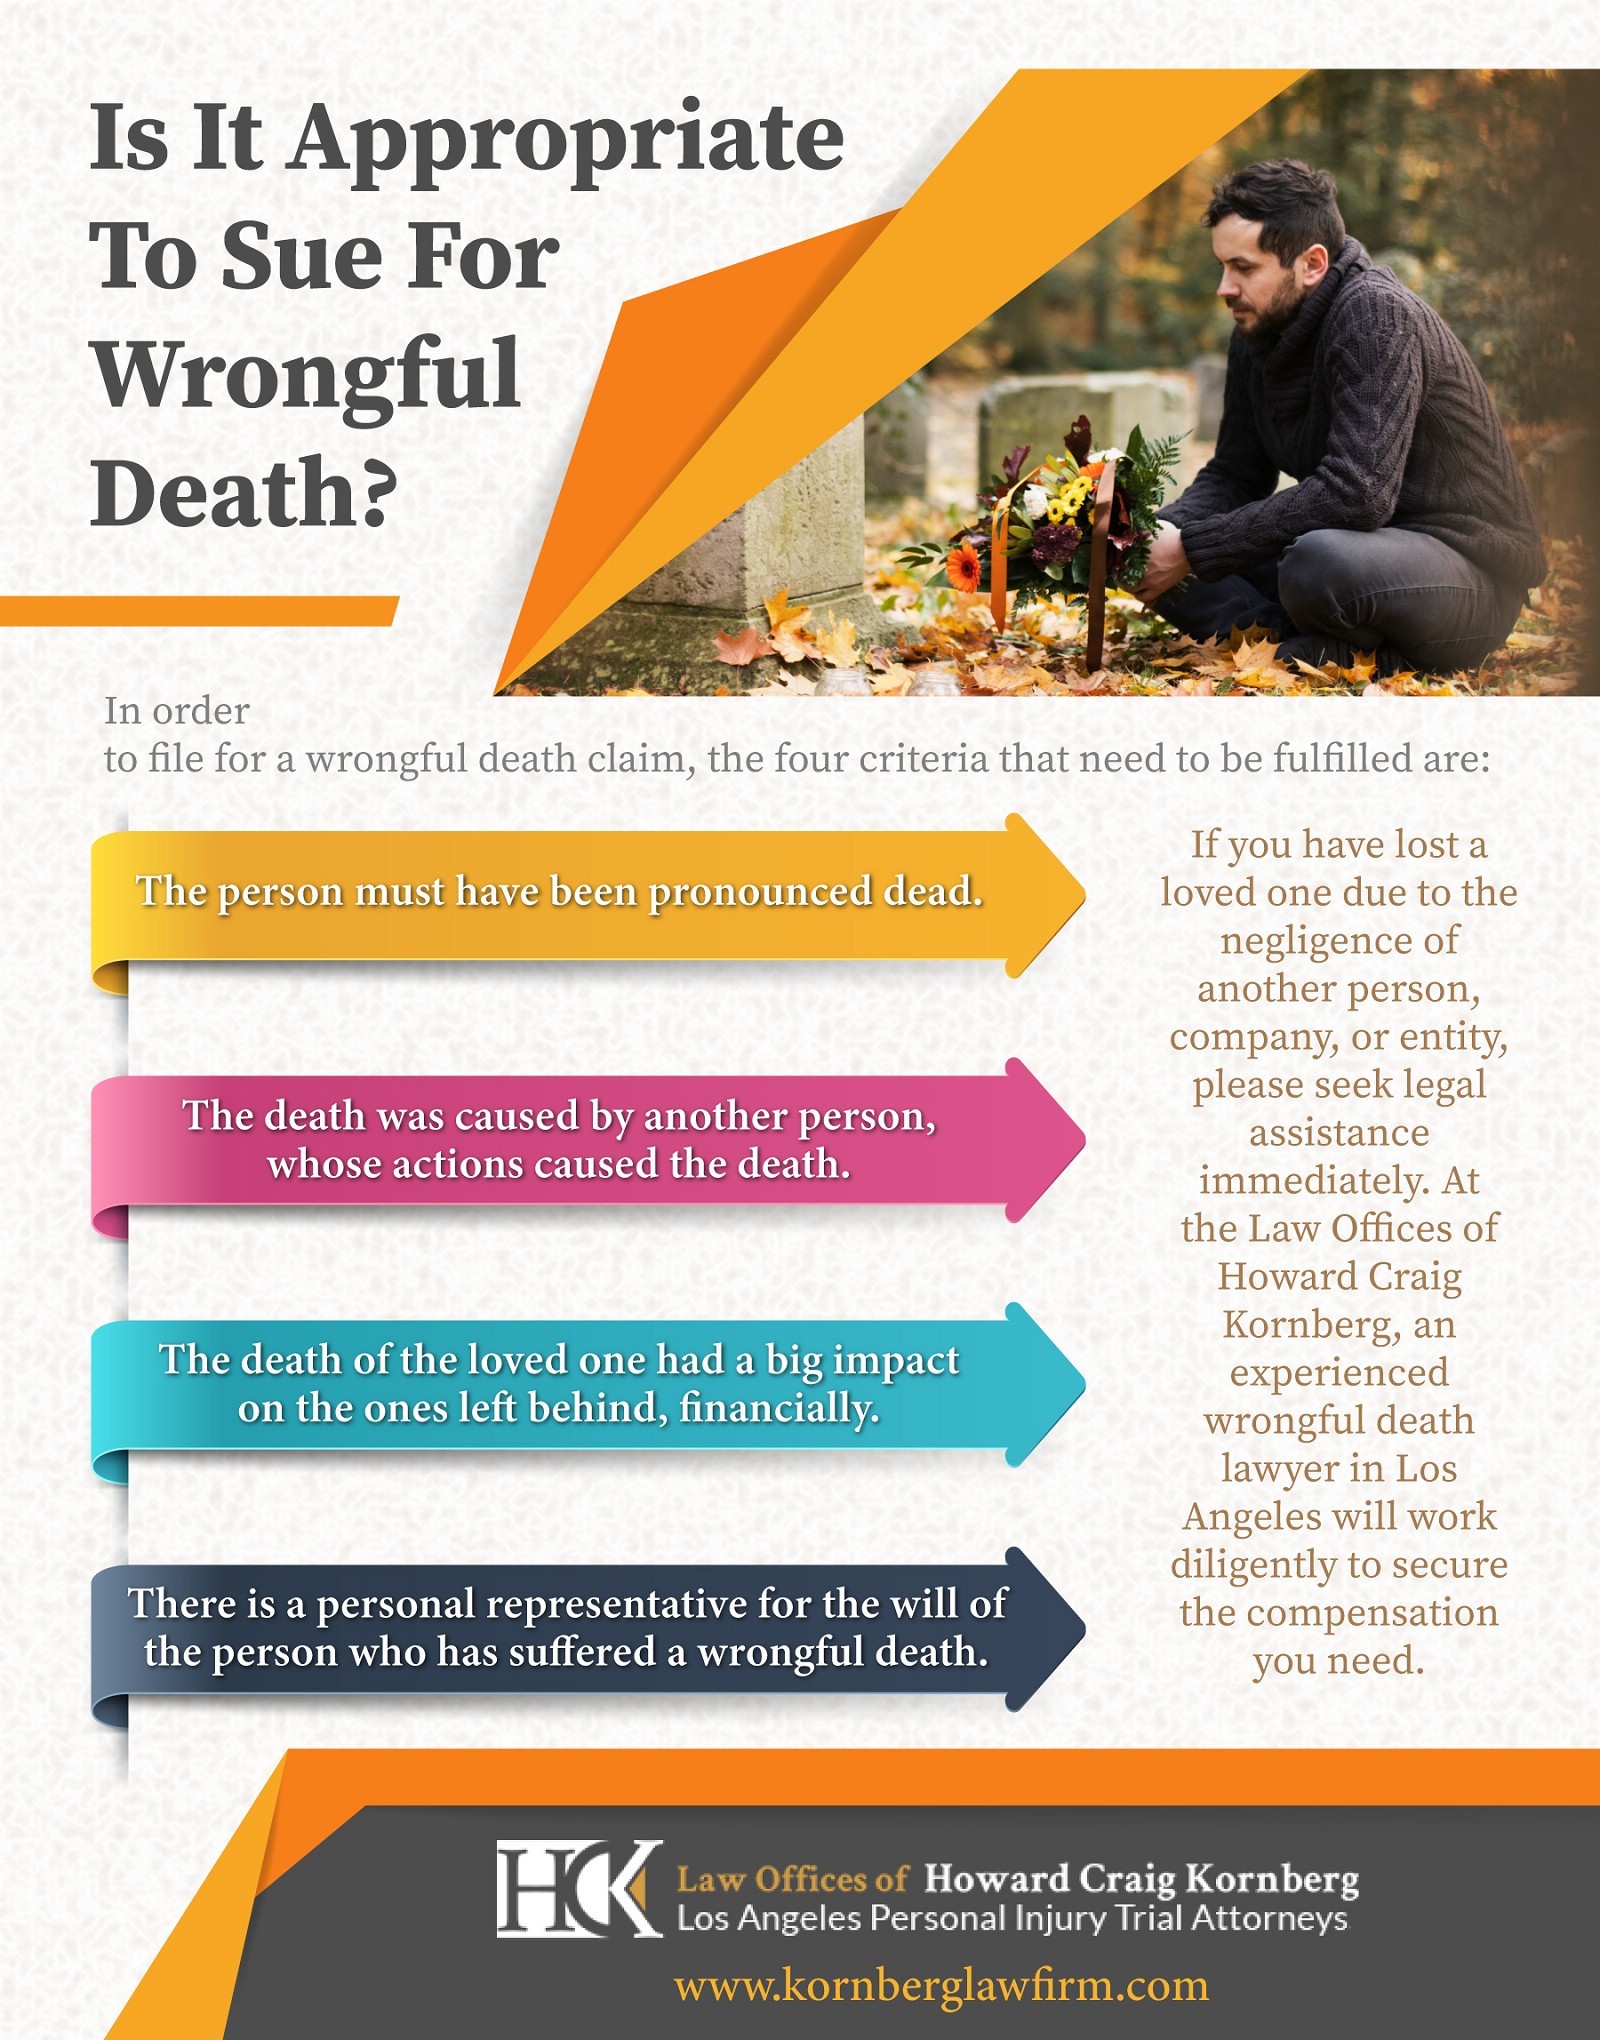 Is It Appropriate To Sue For Wrongful Death?